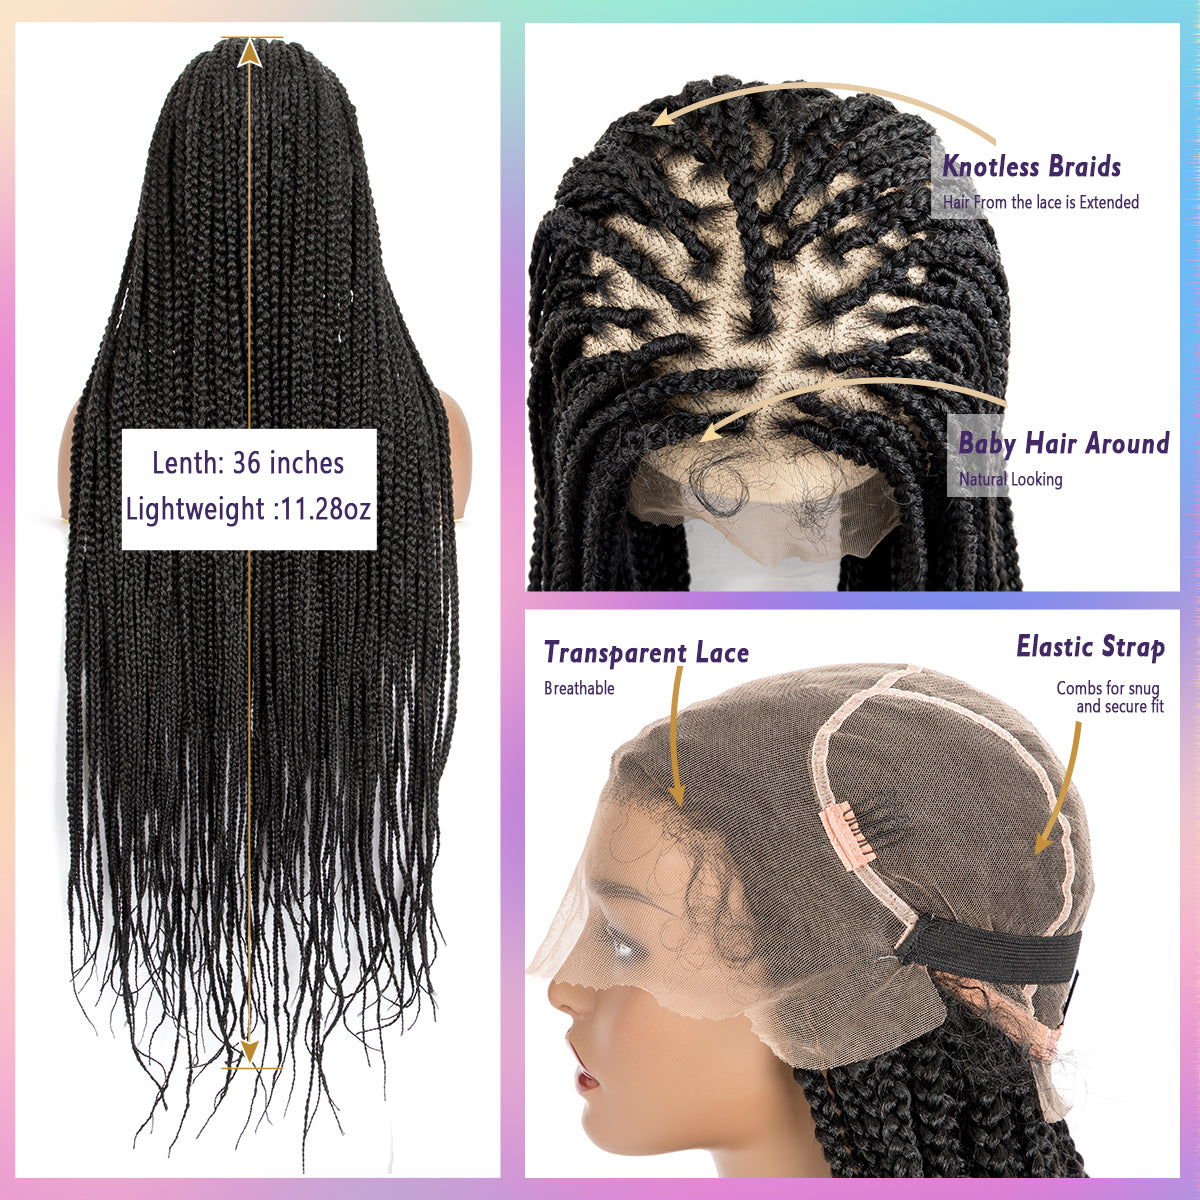 36" Box Braided Wigs Full Lace Knotless Box Braids Wig for Women Synthetic Braided Wig With Baby Hair